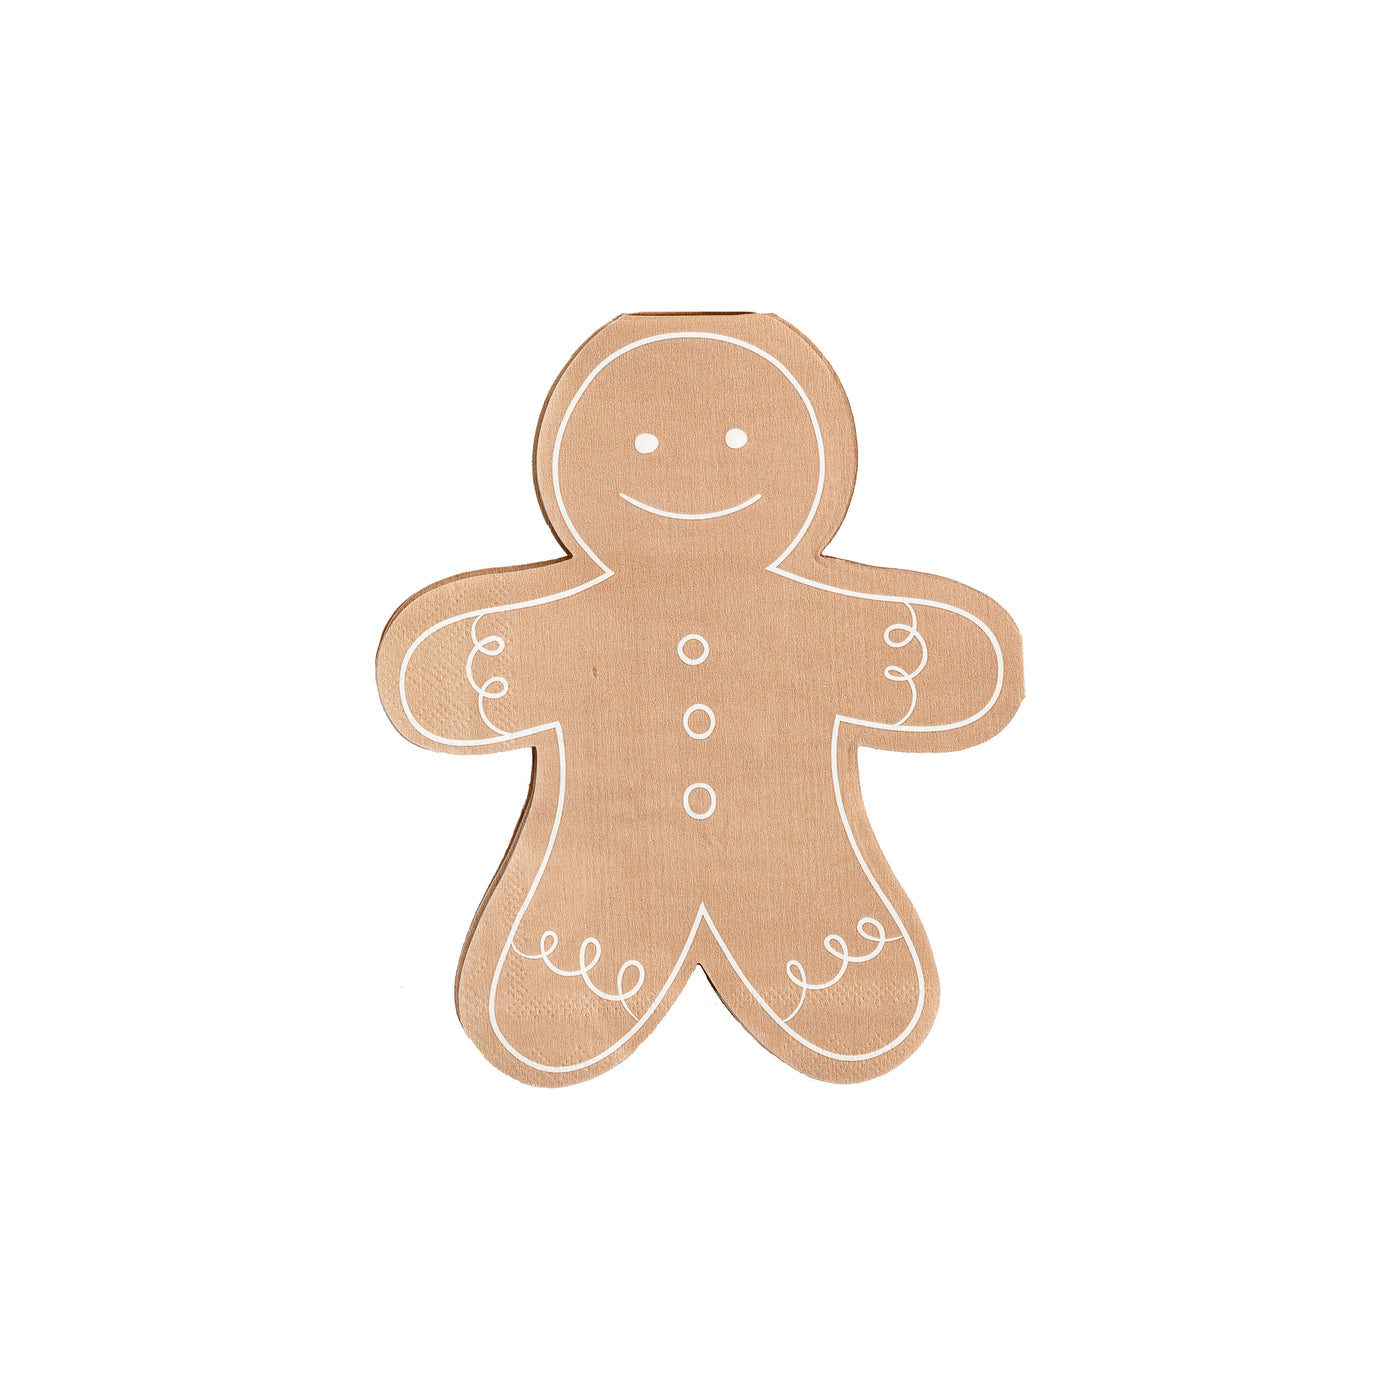 GBD938 - Occasions by Shakira - Gingerbread Man Shaped Napkin